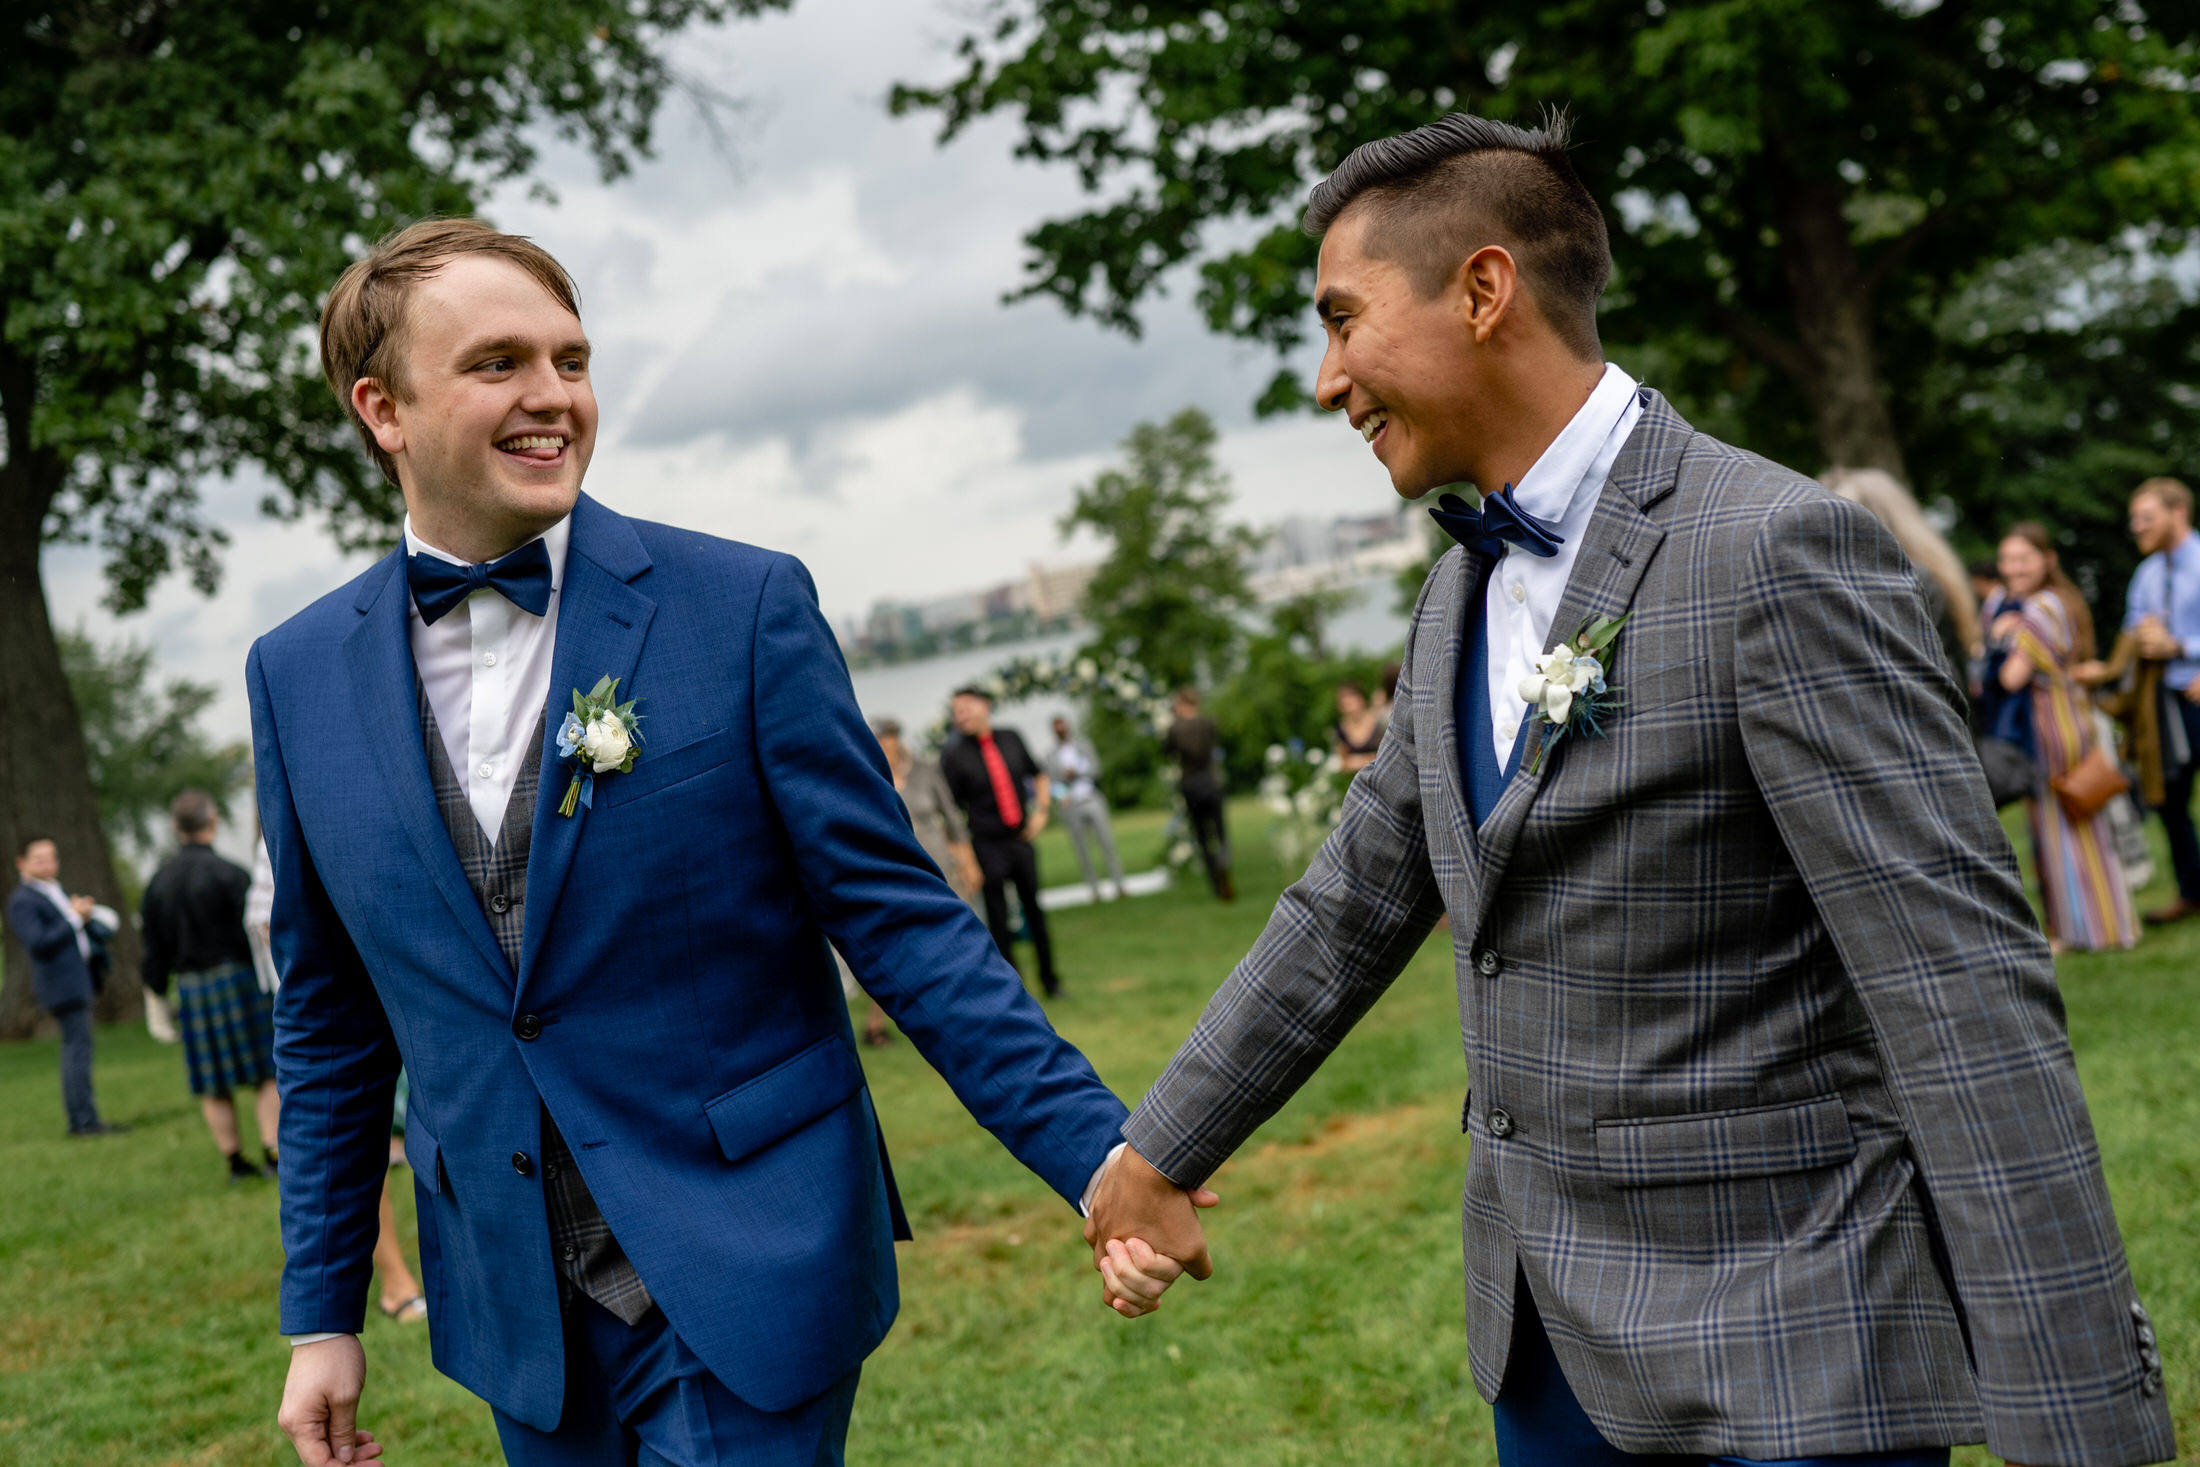 Grooms immediately following their ceremony at Olin Park in Madison Wisconsin